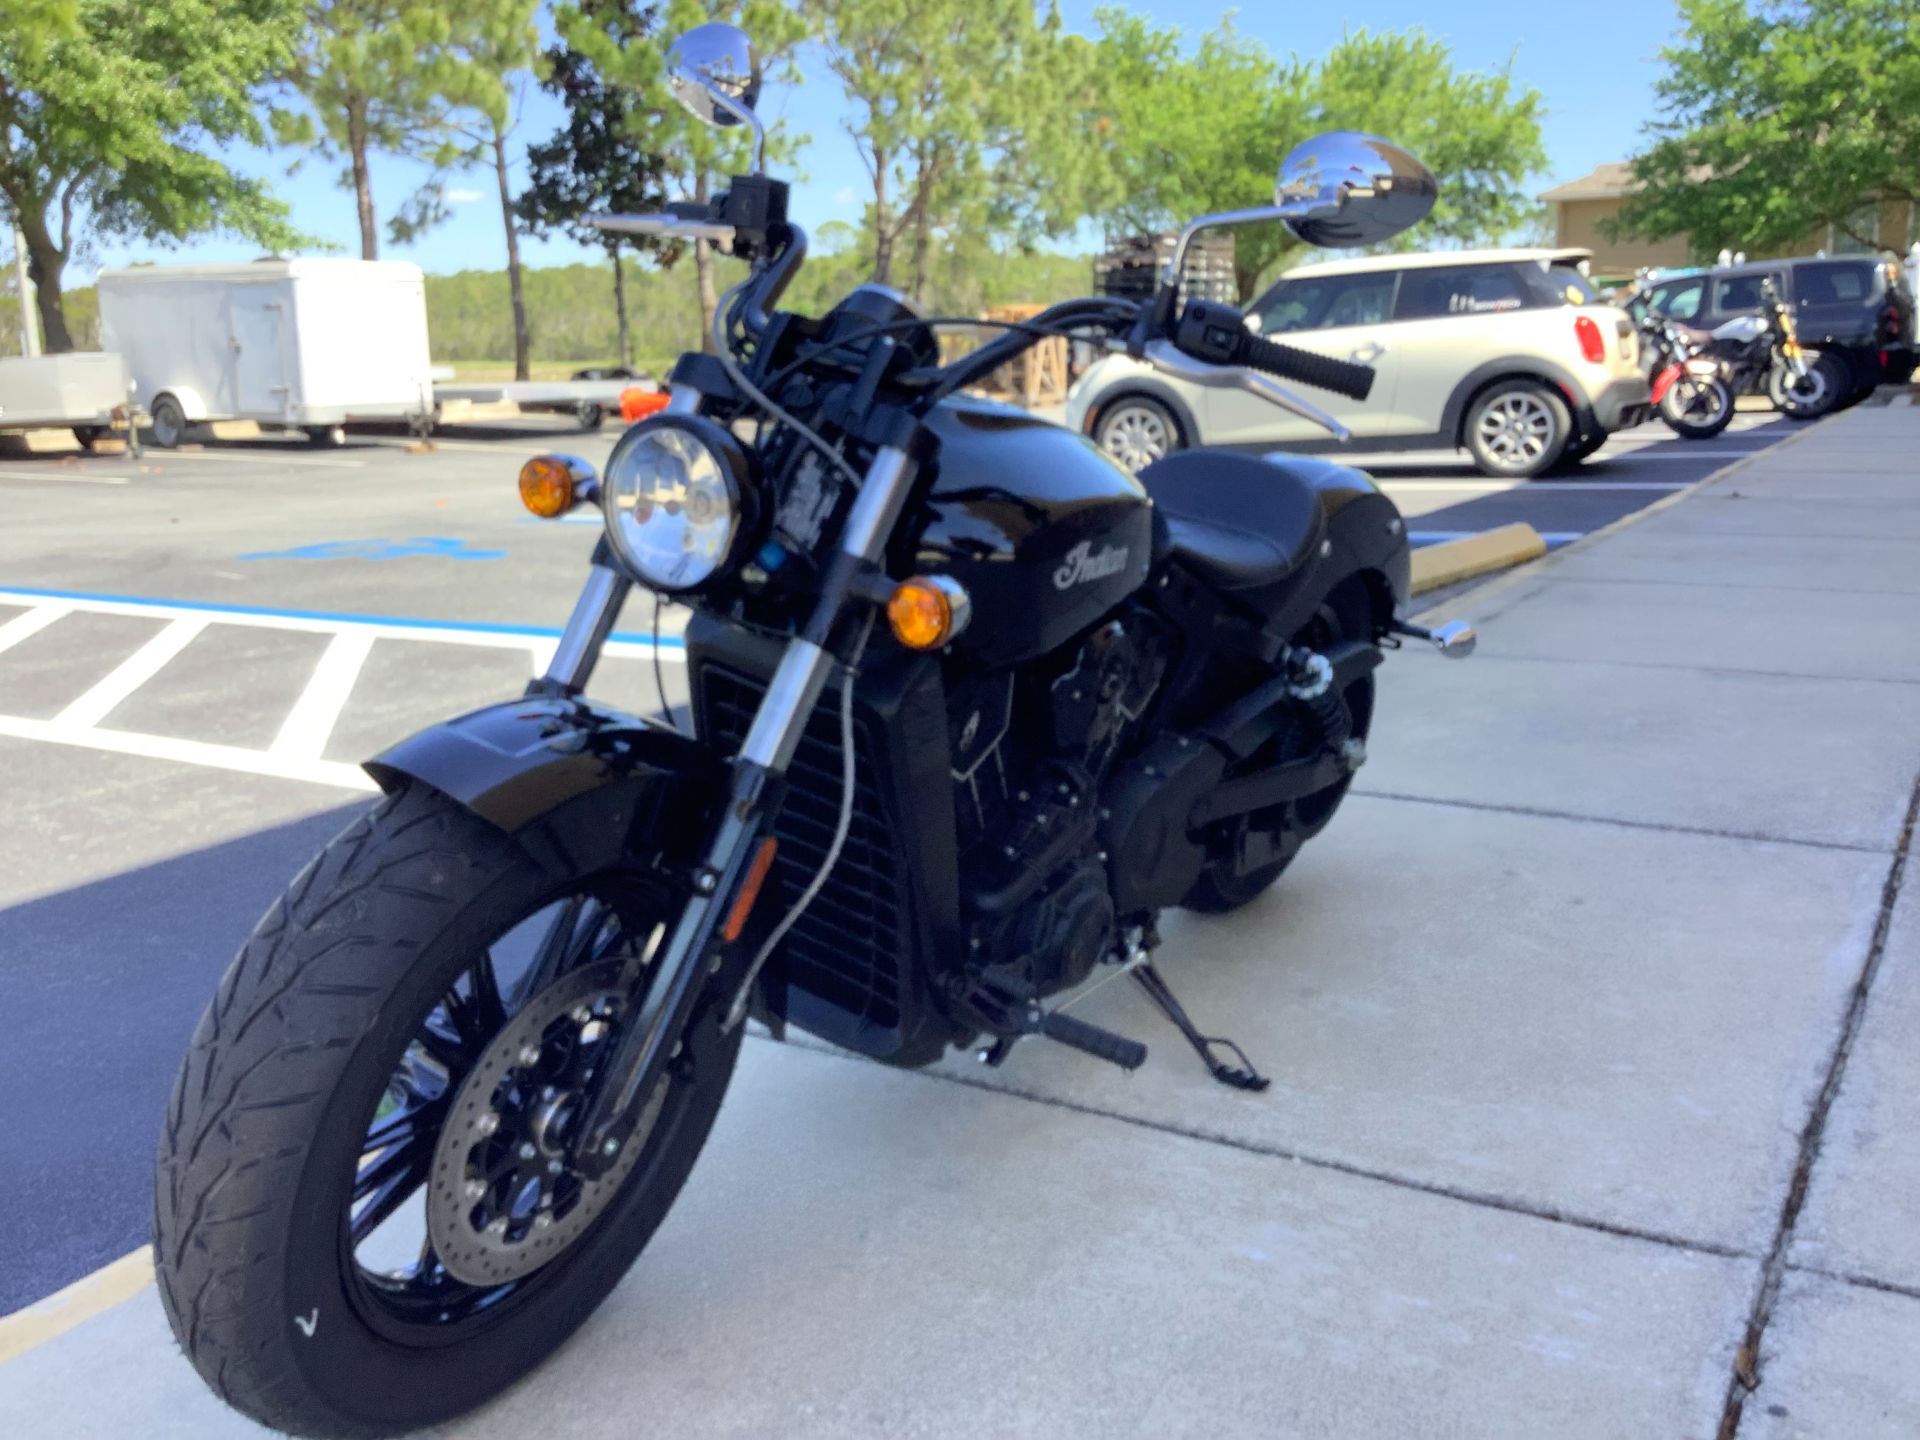 2022 Indian SCOUT 60 NON ABS in Panama City Beach, Florida - Photo 12